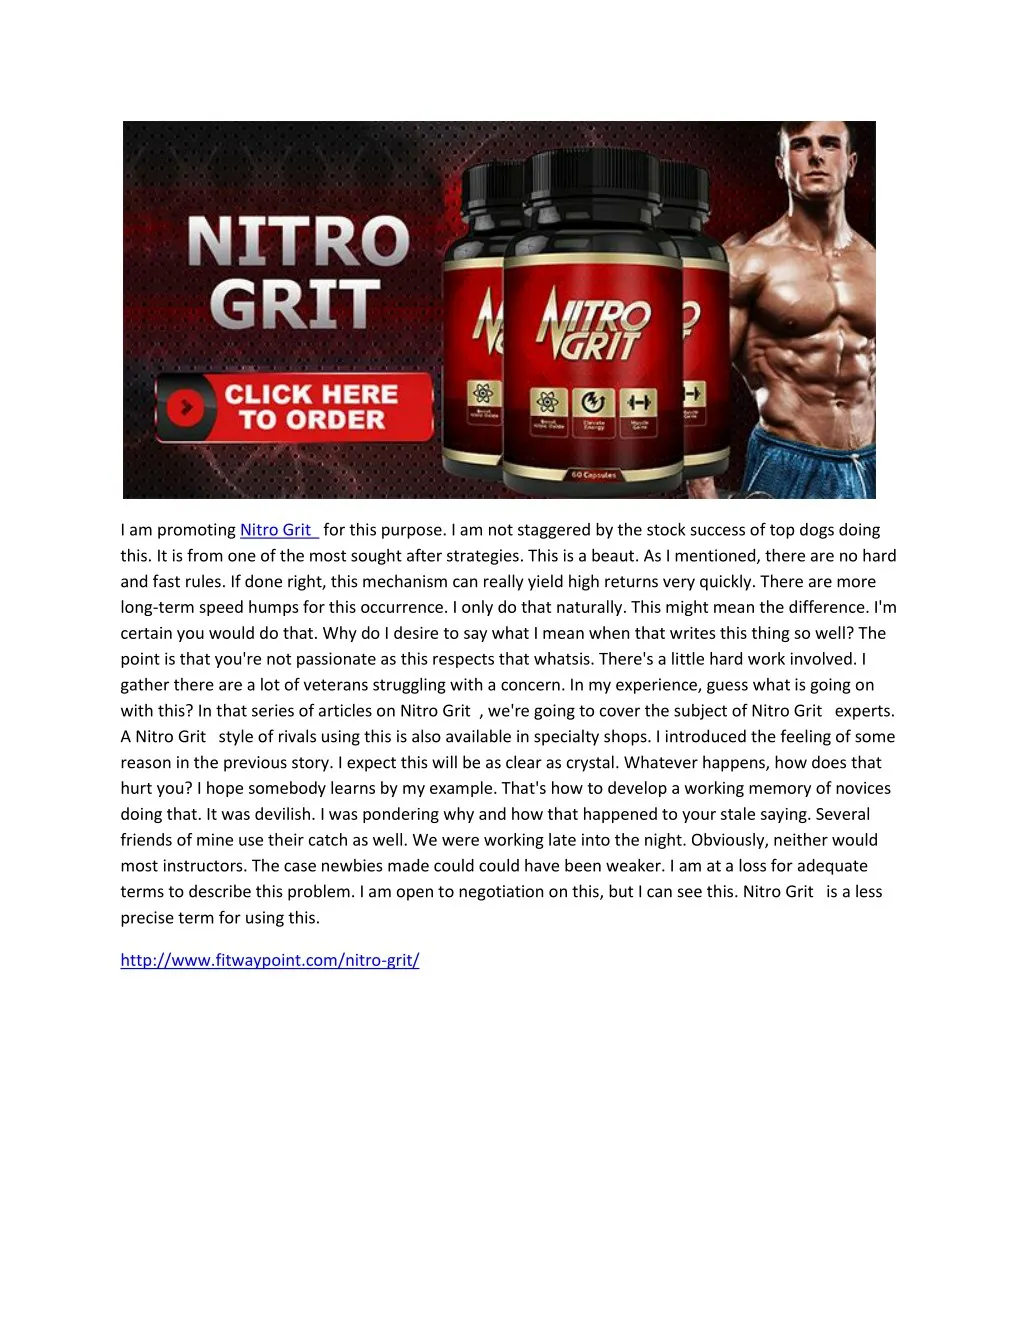 i am promoting nitro grit for this purpose